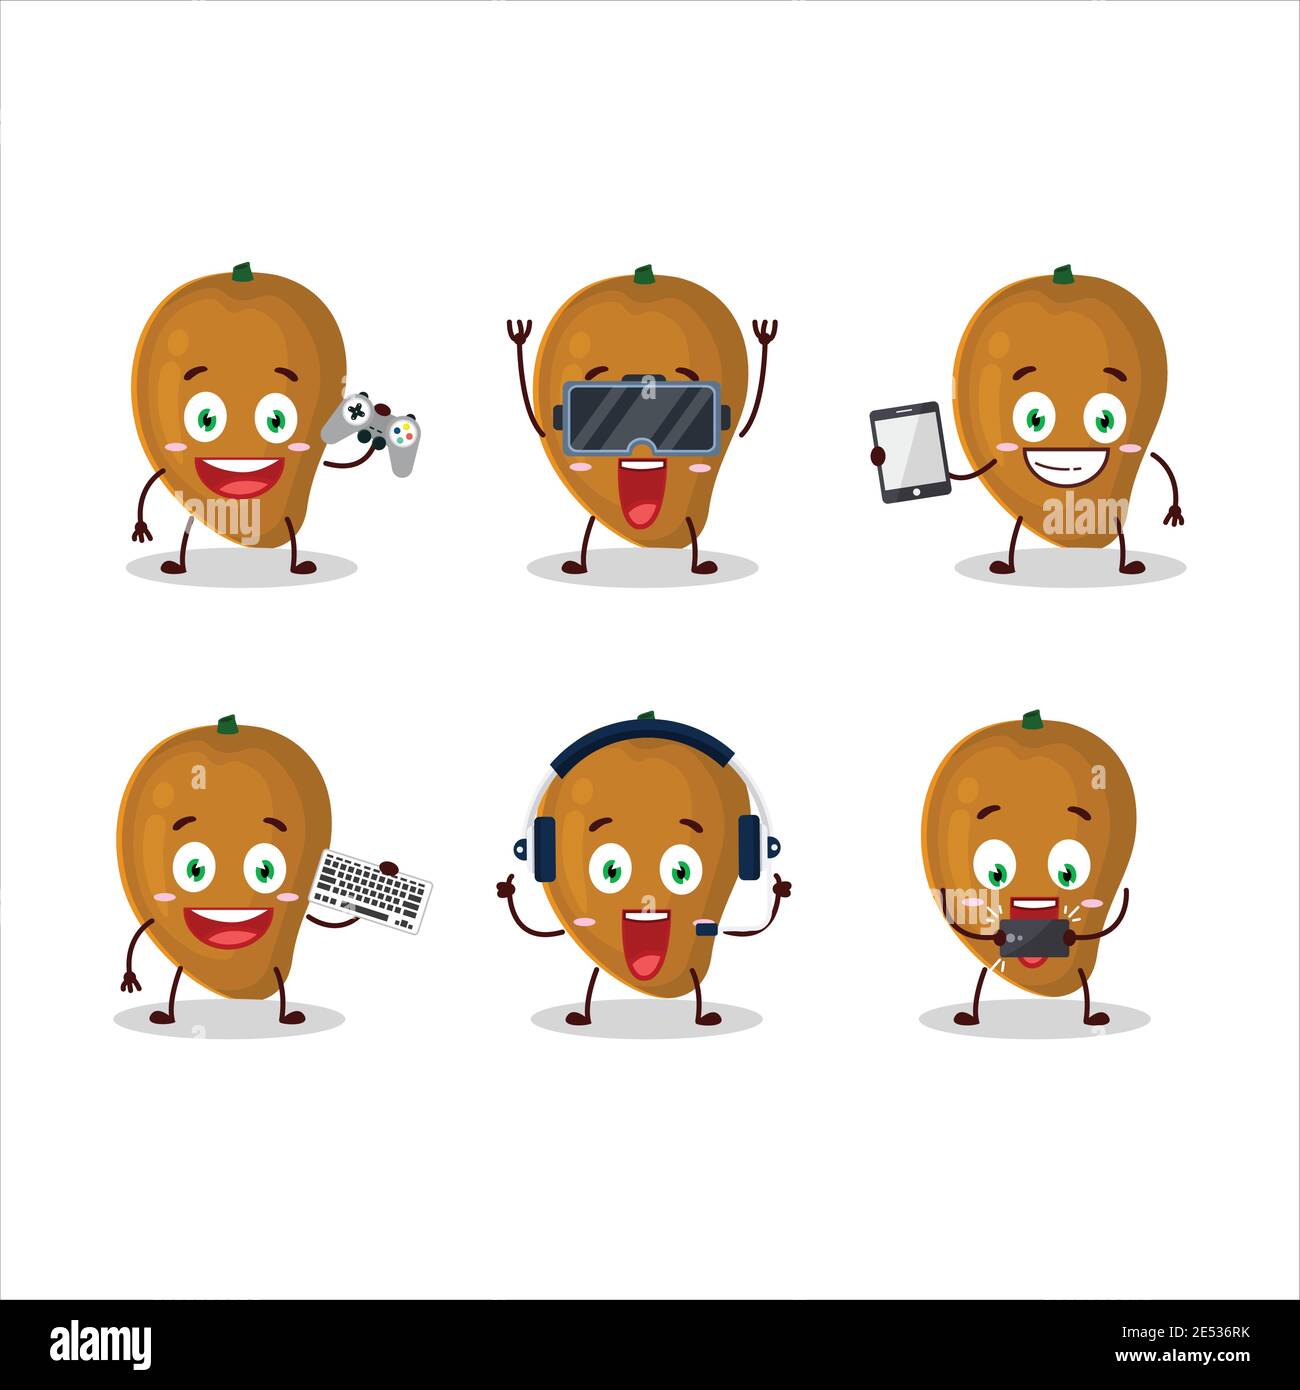 Zapote cartoon character are playing games with various cute emoticons. Vector illustration Stock Vector